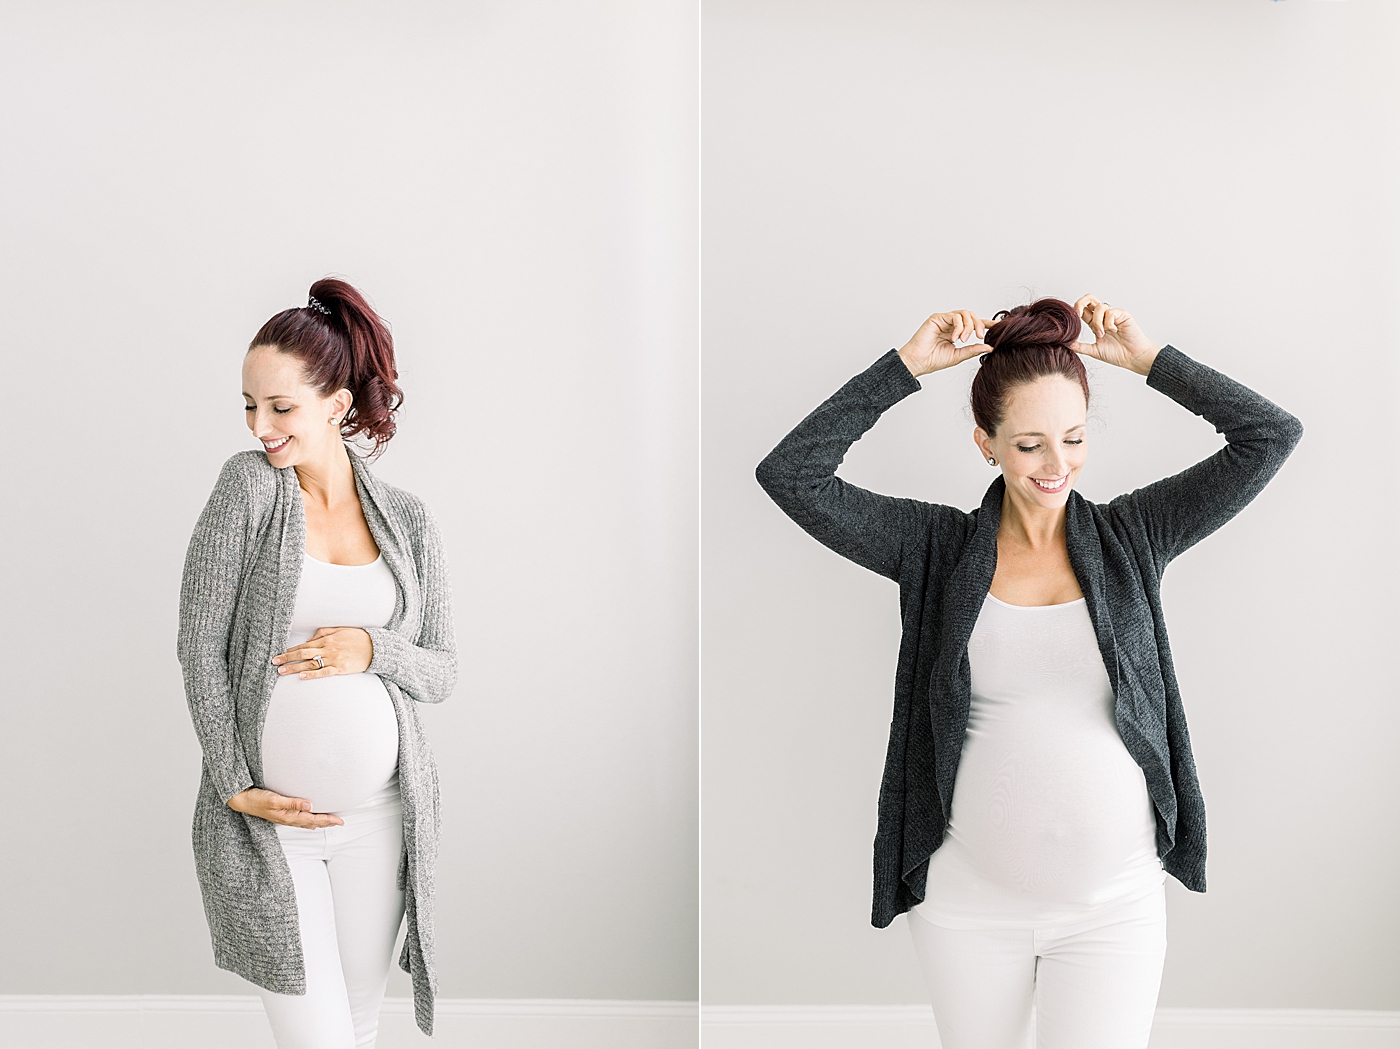 Maternity Workwear: 9 Must-Haves For Every Pregnant Woman